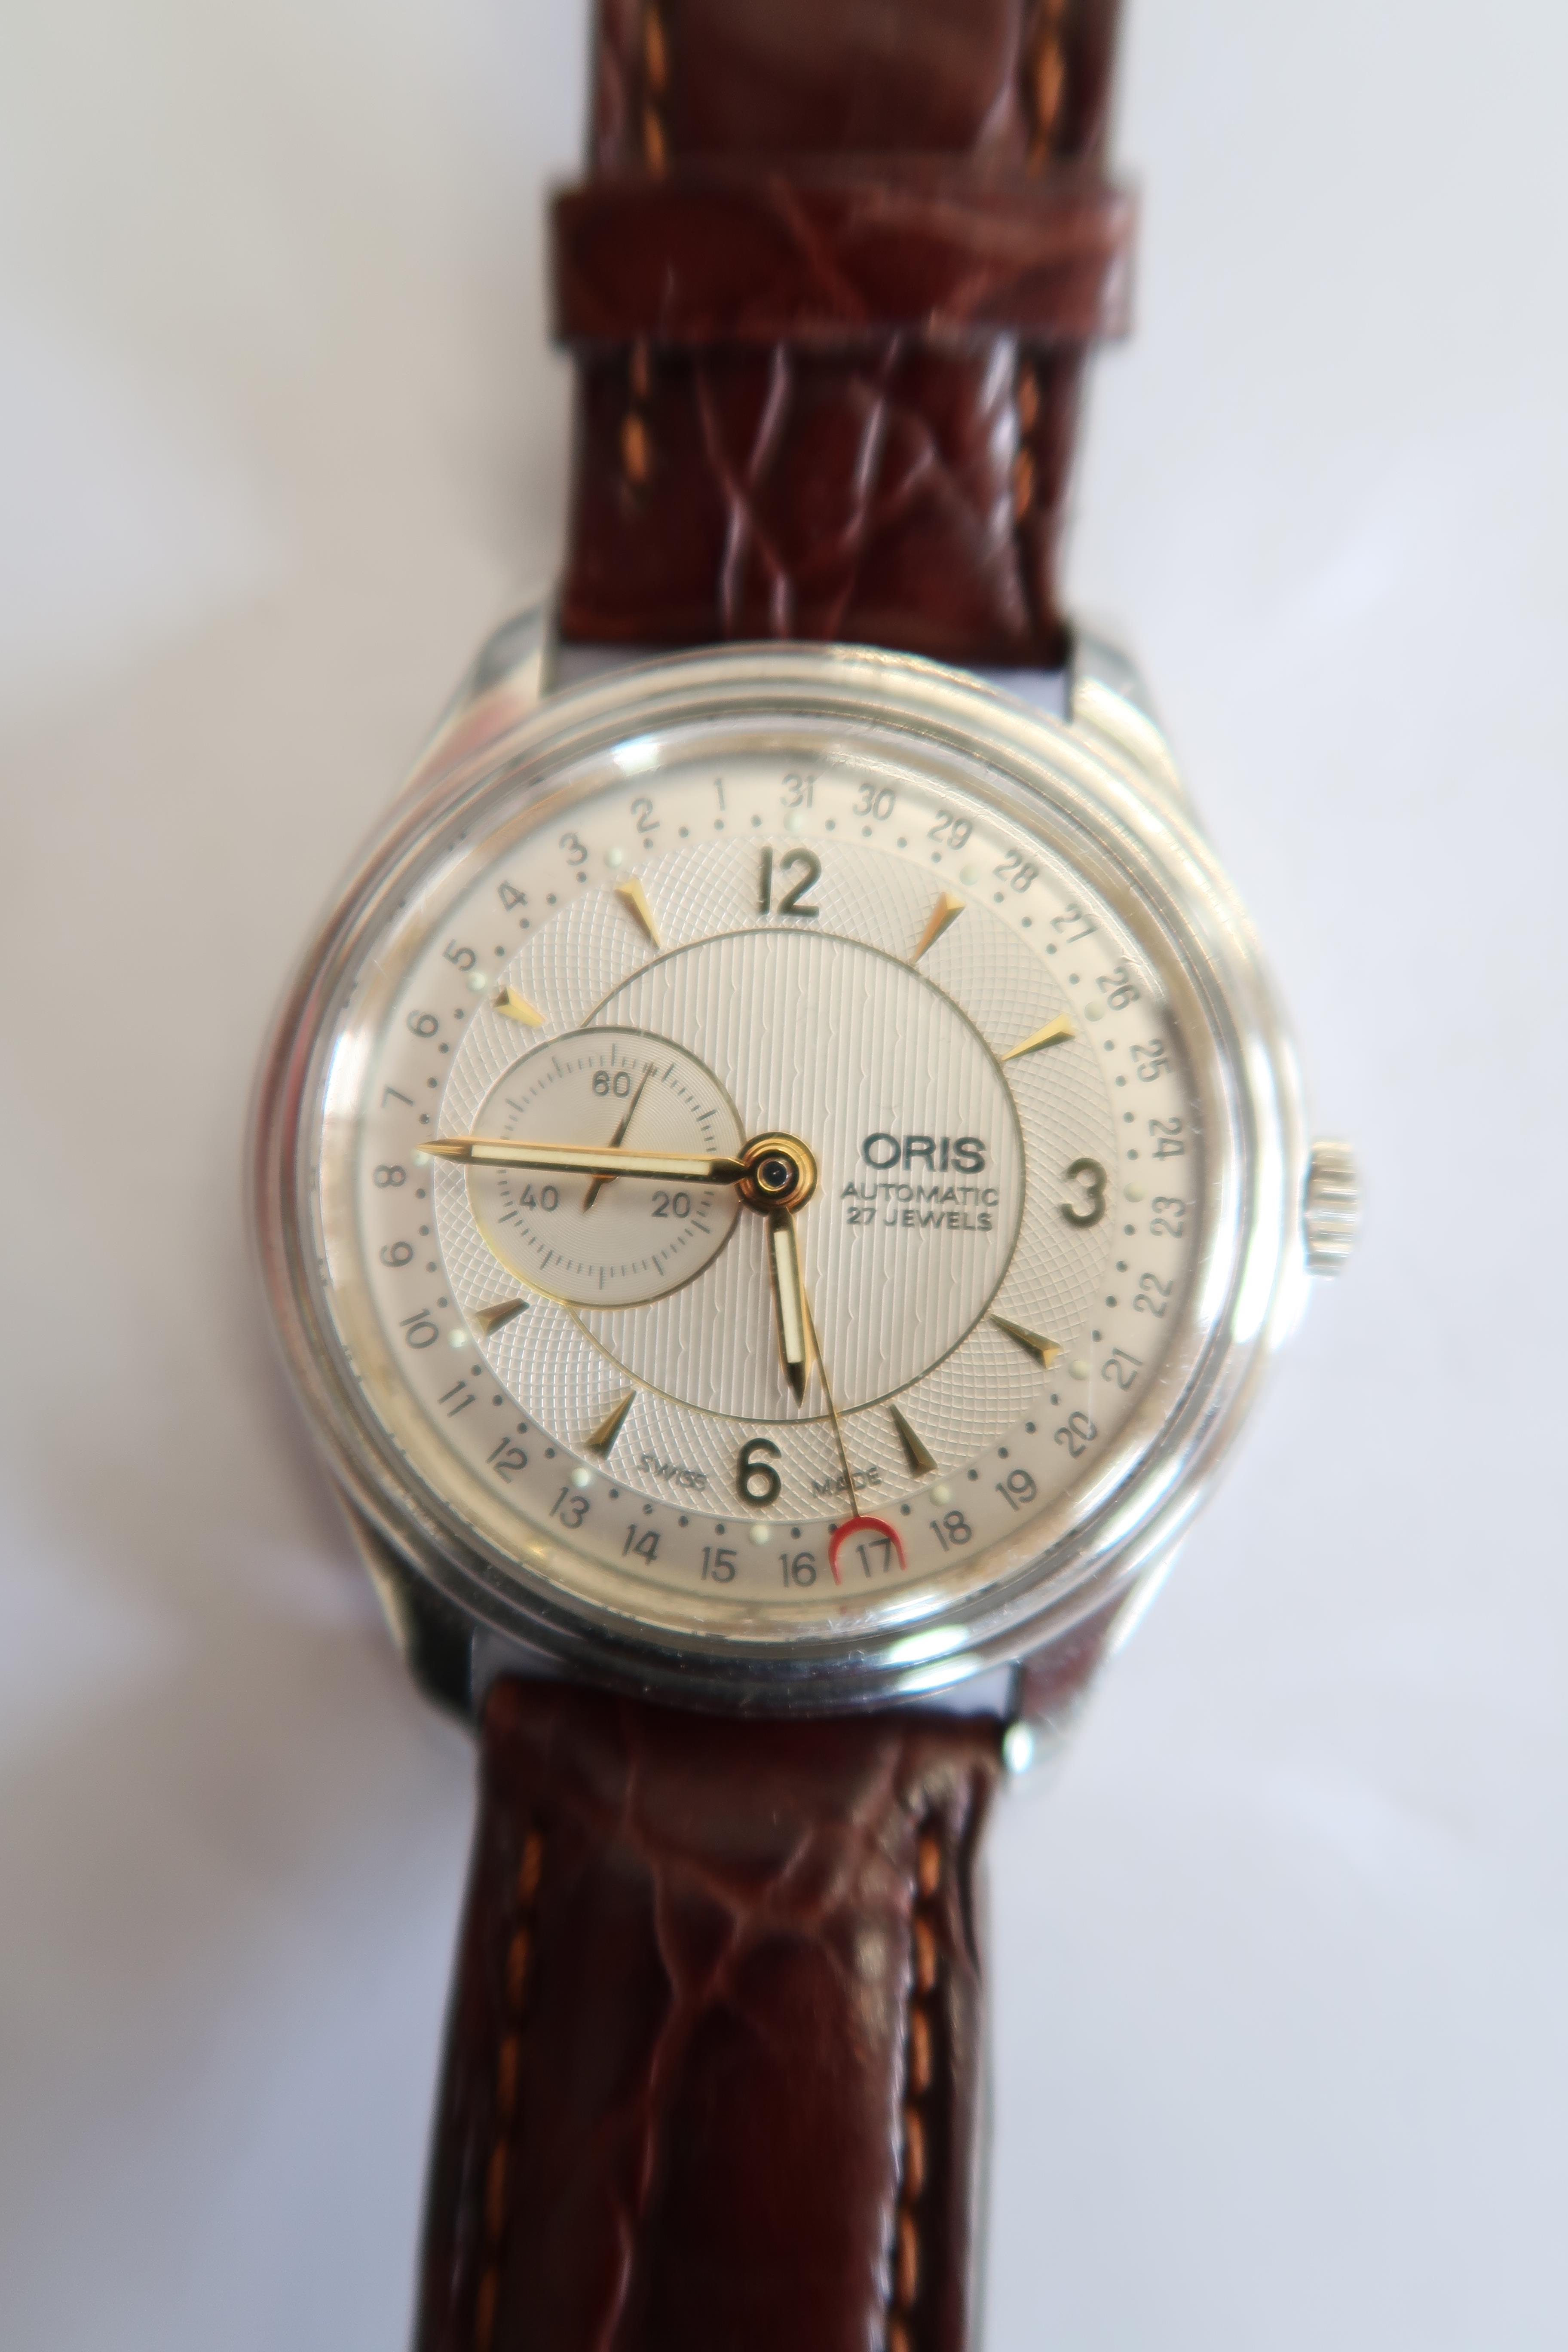 An Oris Gents automatic wristwatch with date and secondhand in its case with a good quality